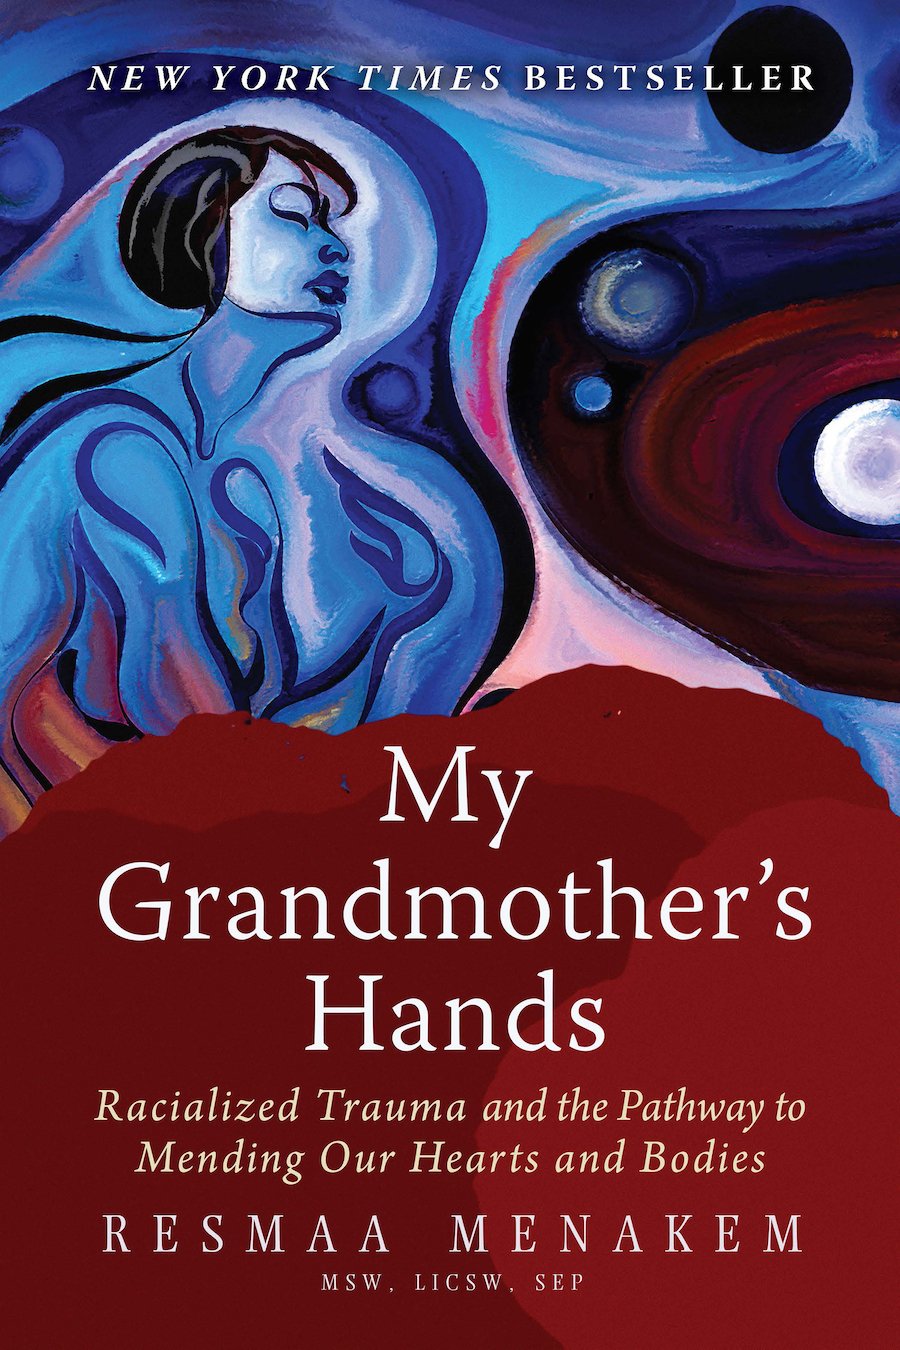 The book cover for "My Grandmother's Hands"